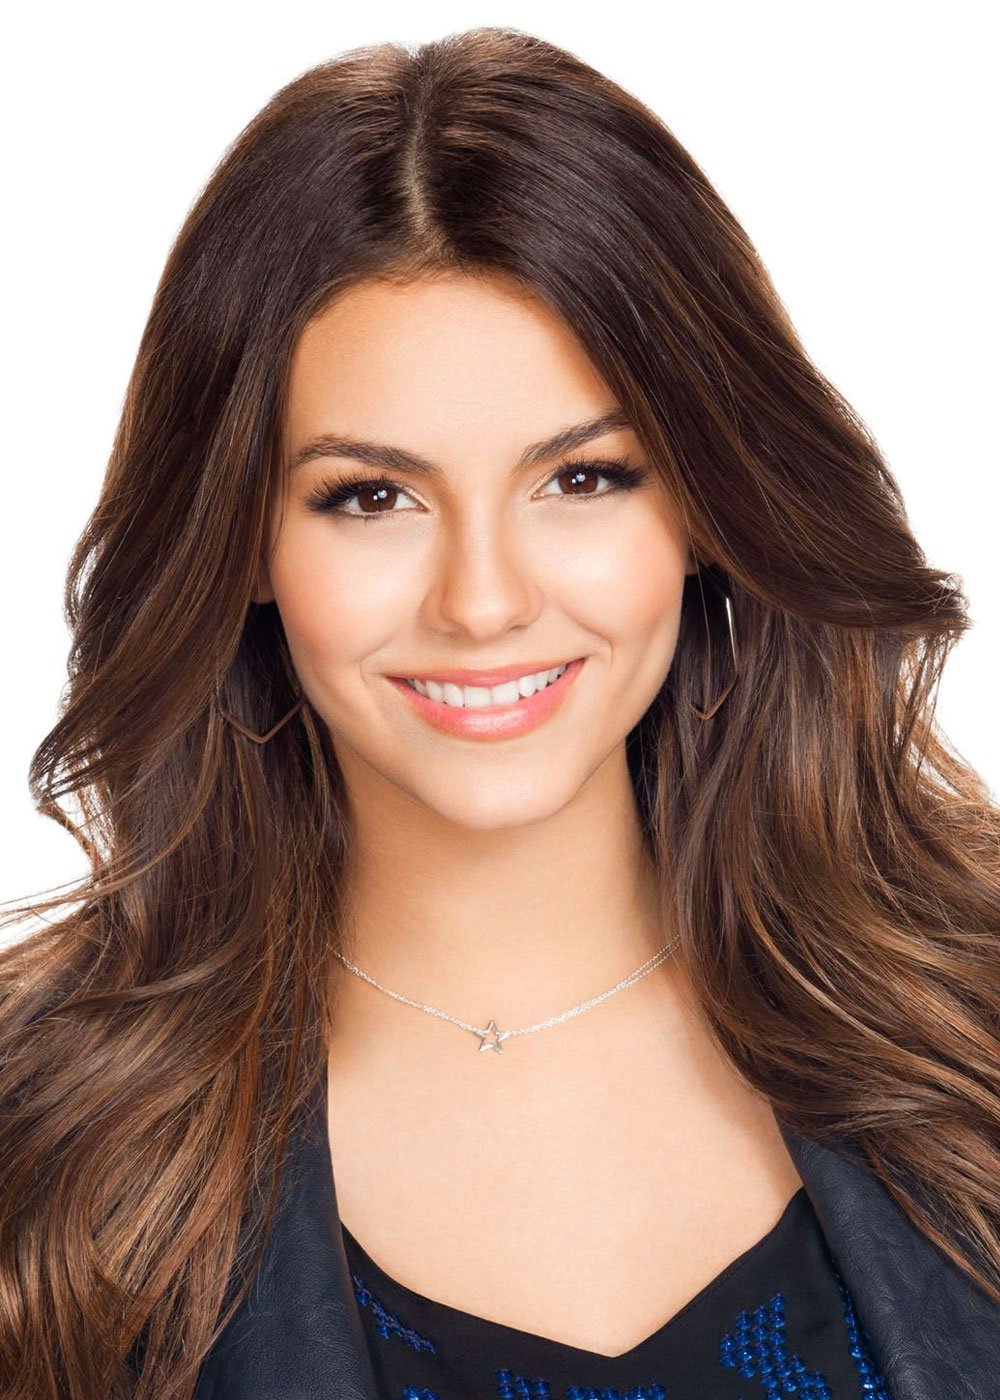 GrayRock brought in Award winning Actress / Singer Victoria Justice to appe...